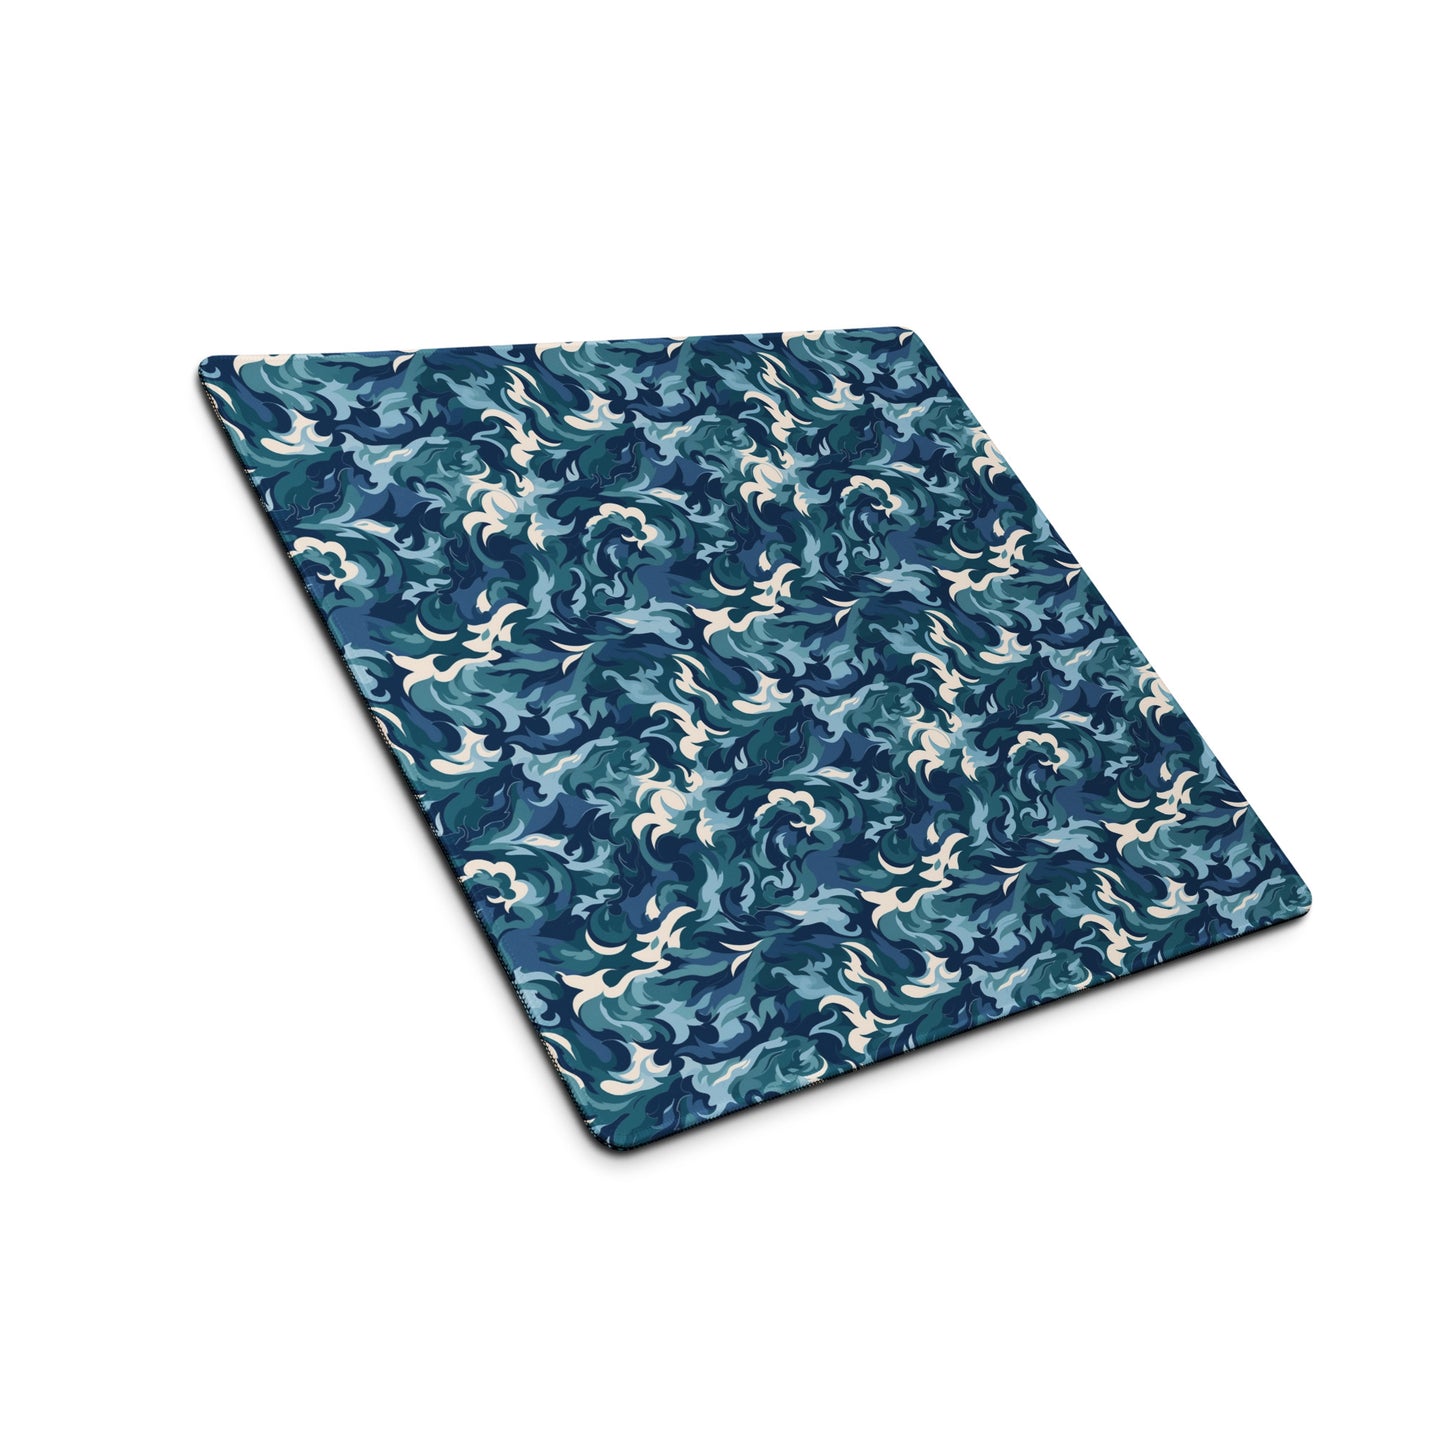 A 18" x 16" desk pad with a teal and white camo pattern sitting at an angle.